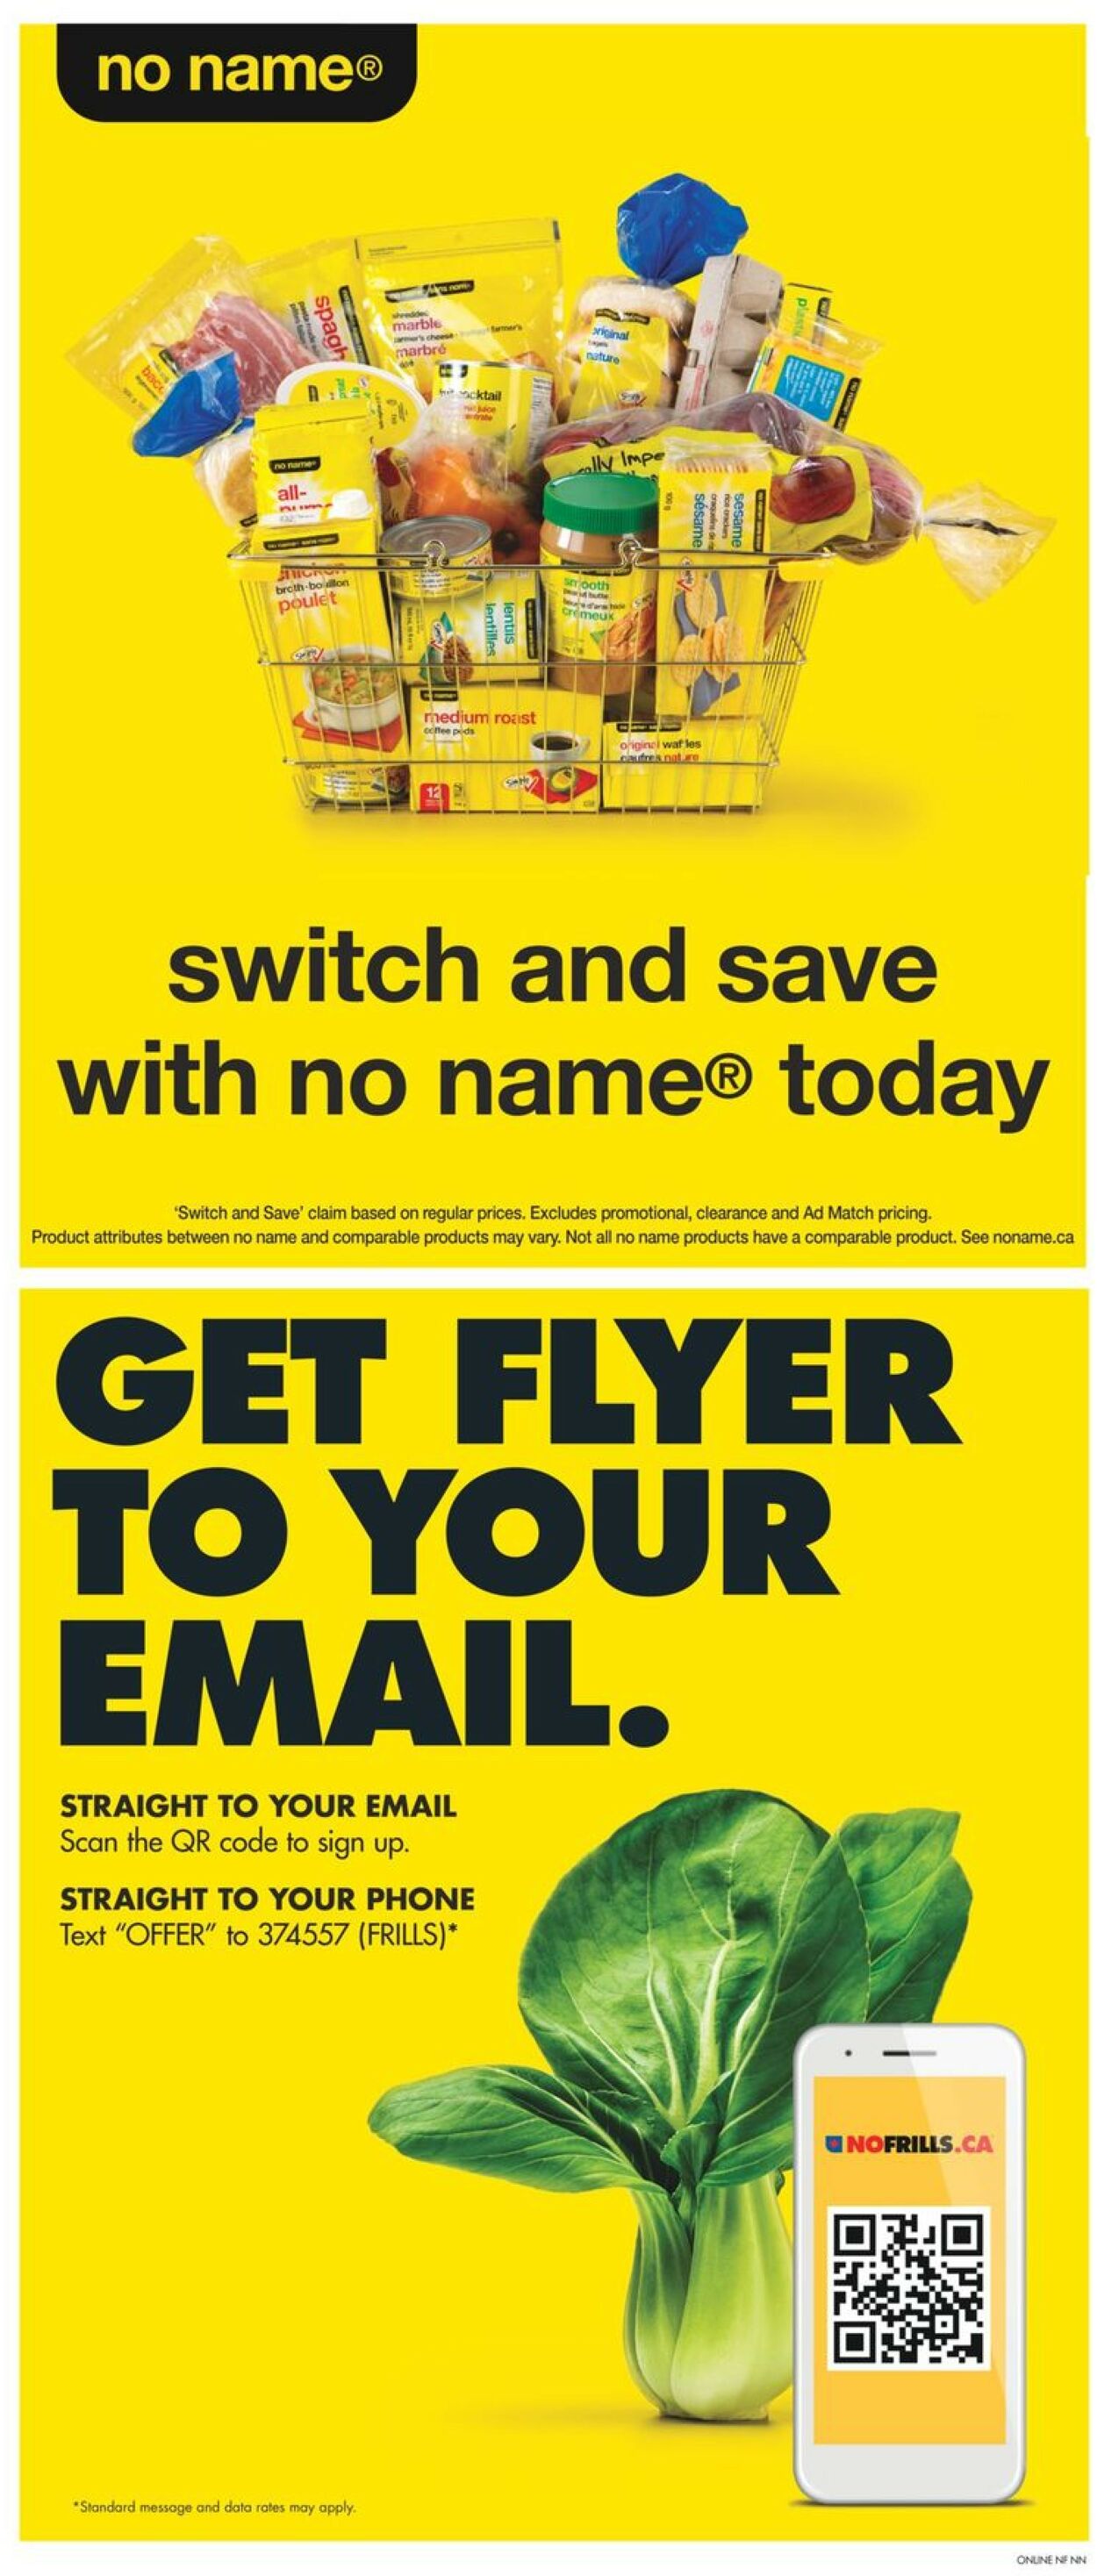 No Frills Flyer from 02/09/2023